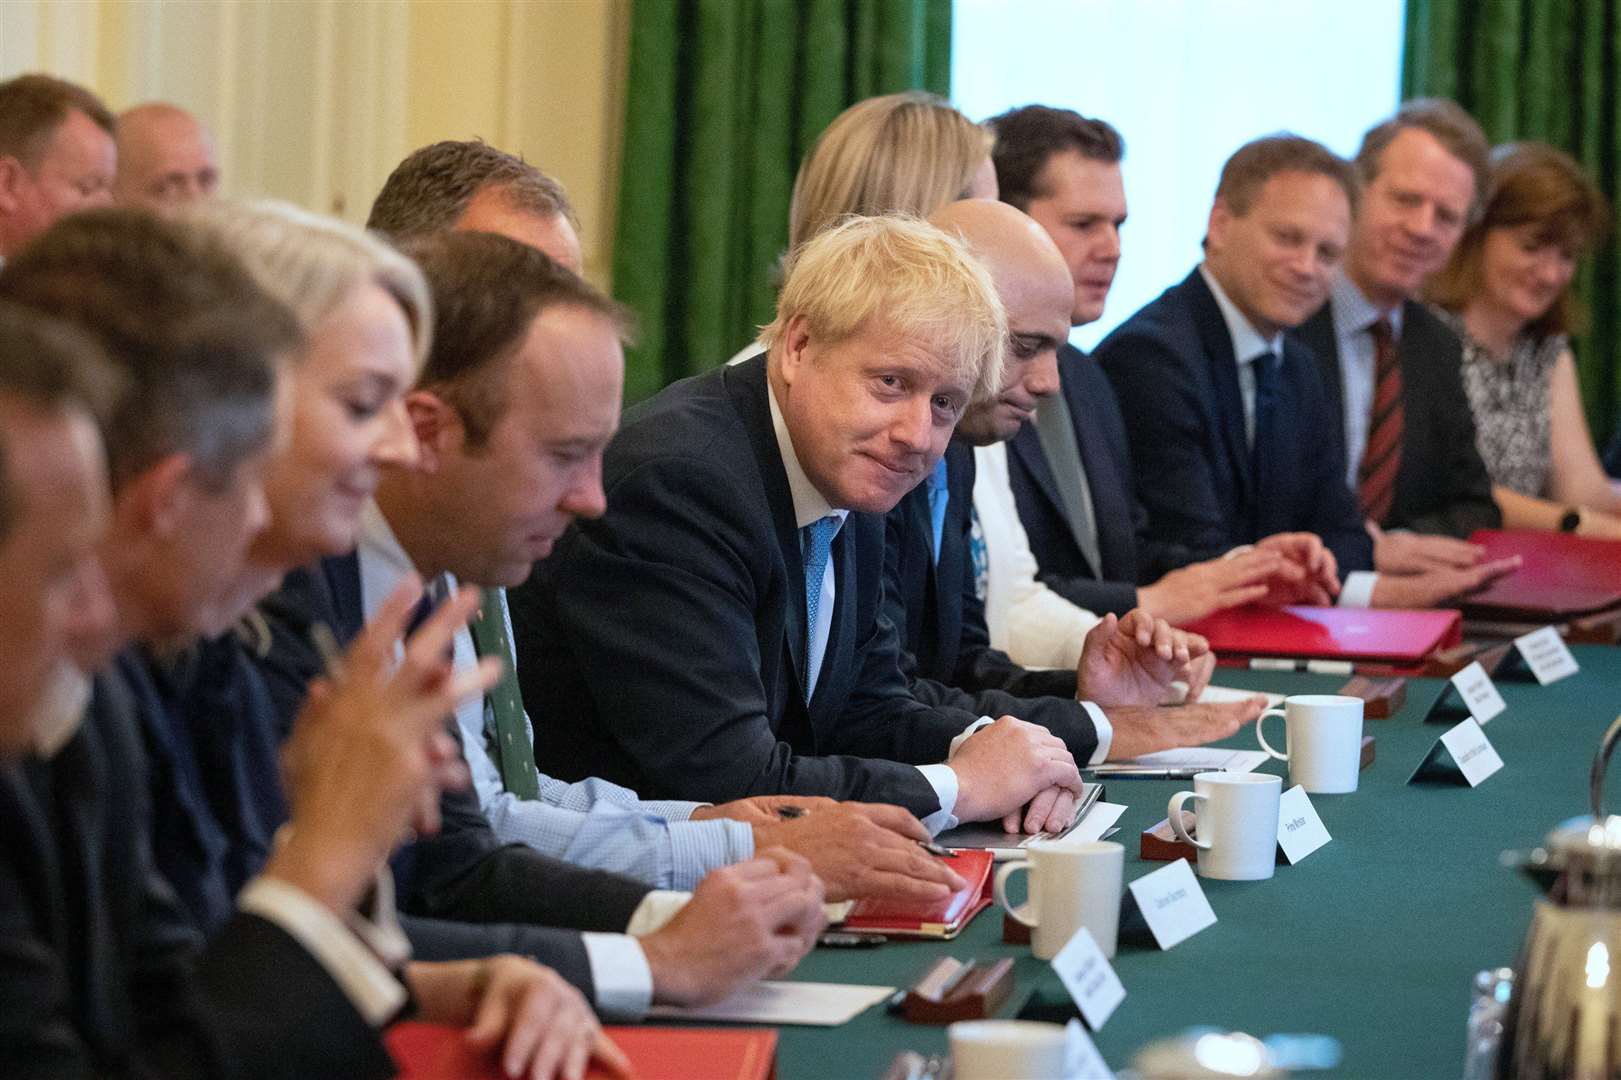 Prime Minister Boris Johnson chairing his first Cabinet meeting in Downing Street back in 2019.